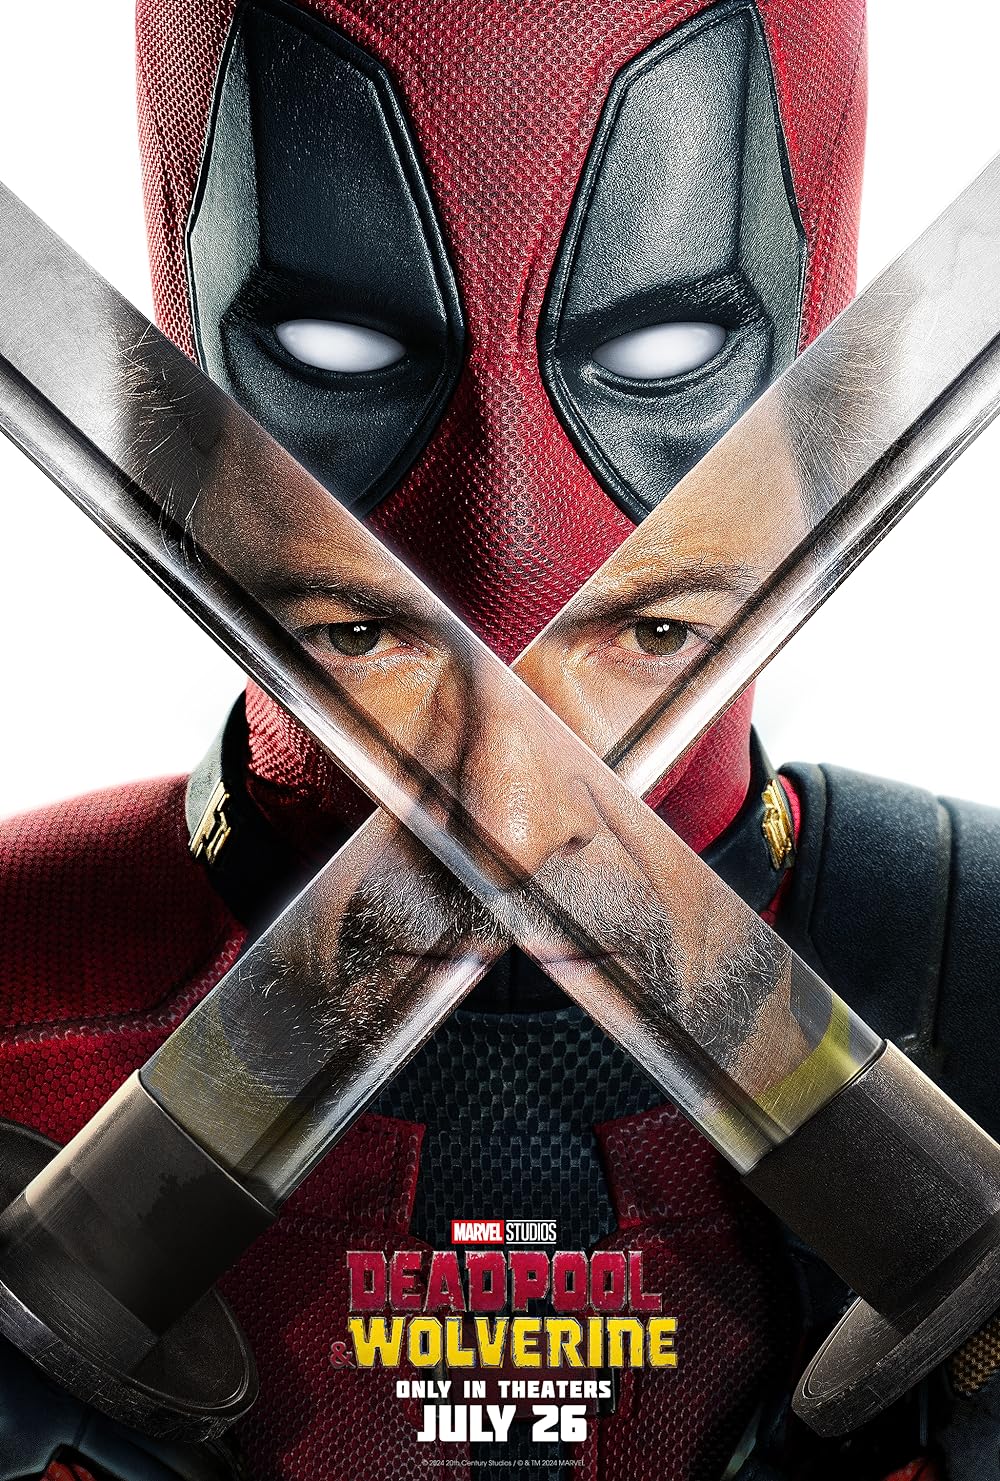 Watch trailer for the Deadpool & Wolverine